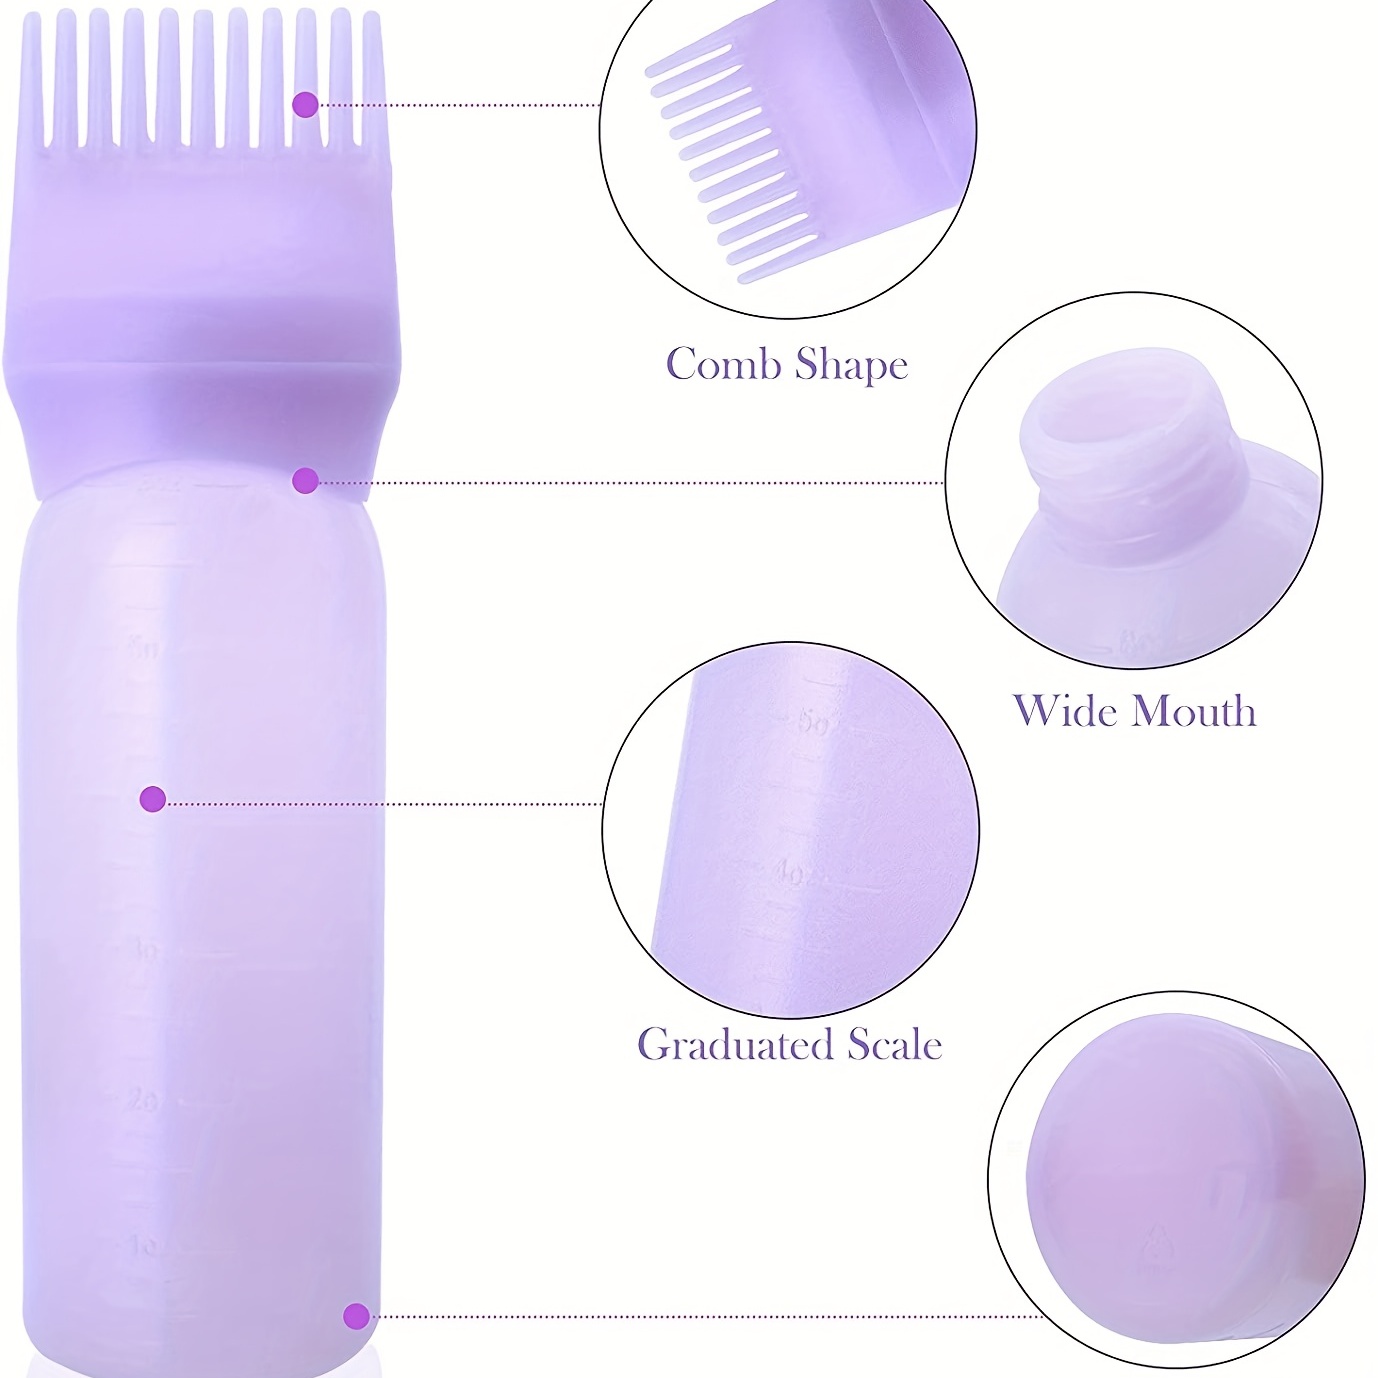 Hair Comb Applicator Bottle, Professional Graduated scale, Hair Coloring,  Dye and scalp treament for Salon, Family (3 pcs)